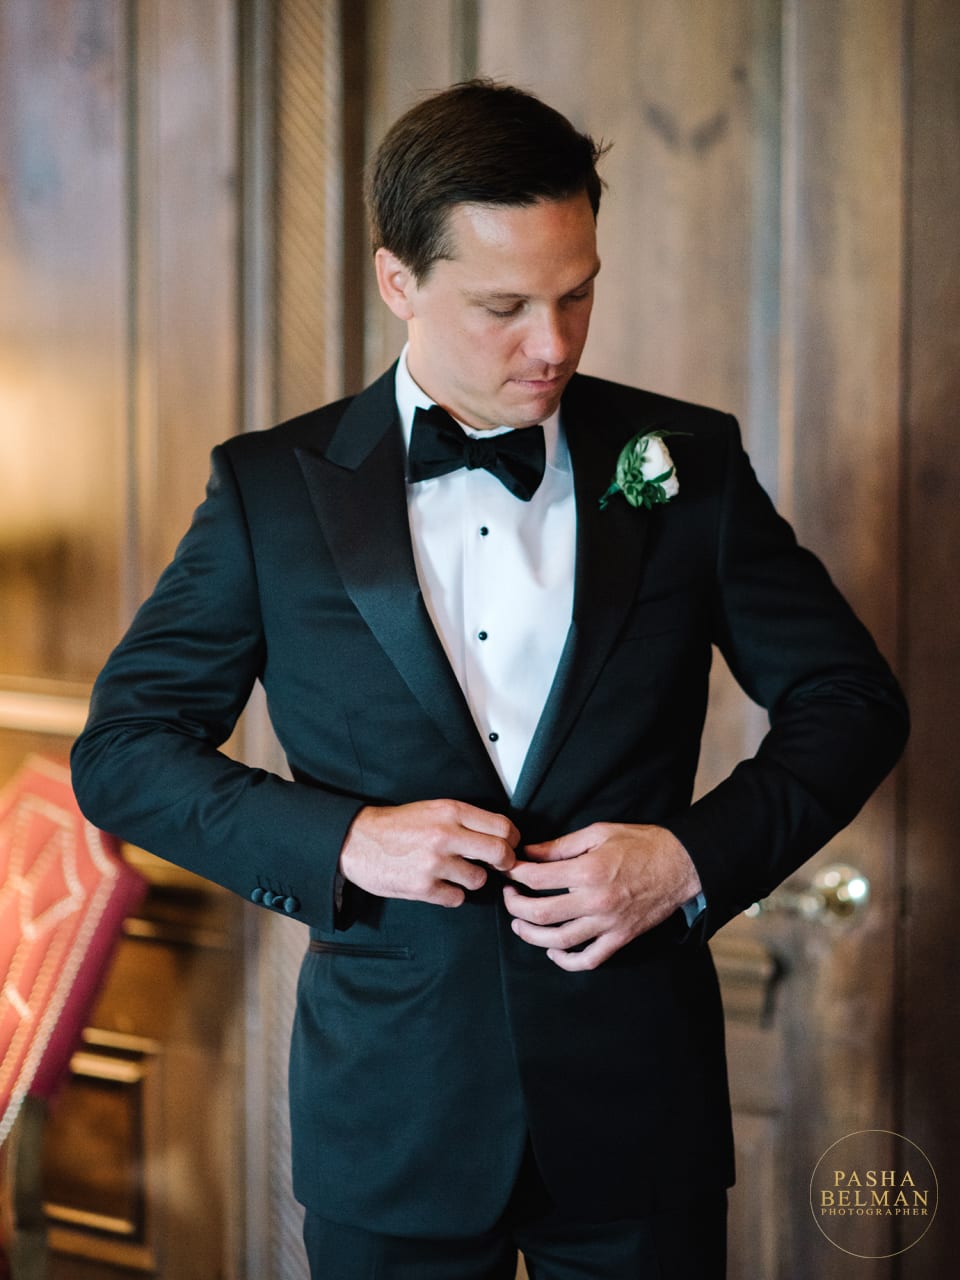 Groom is getting ready at a wedding in Charlotte Country Club in North Carolina. Photographer: Pasha Belman